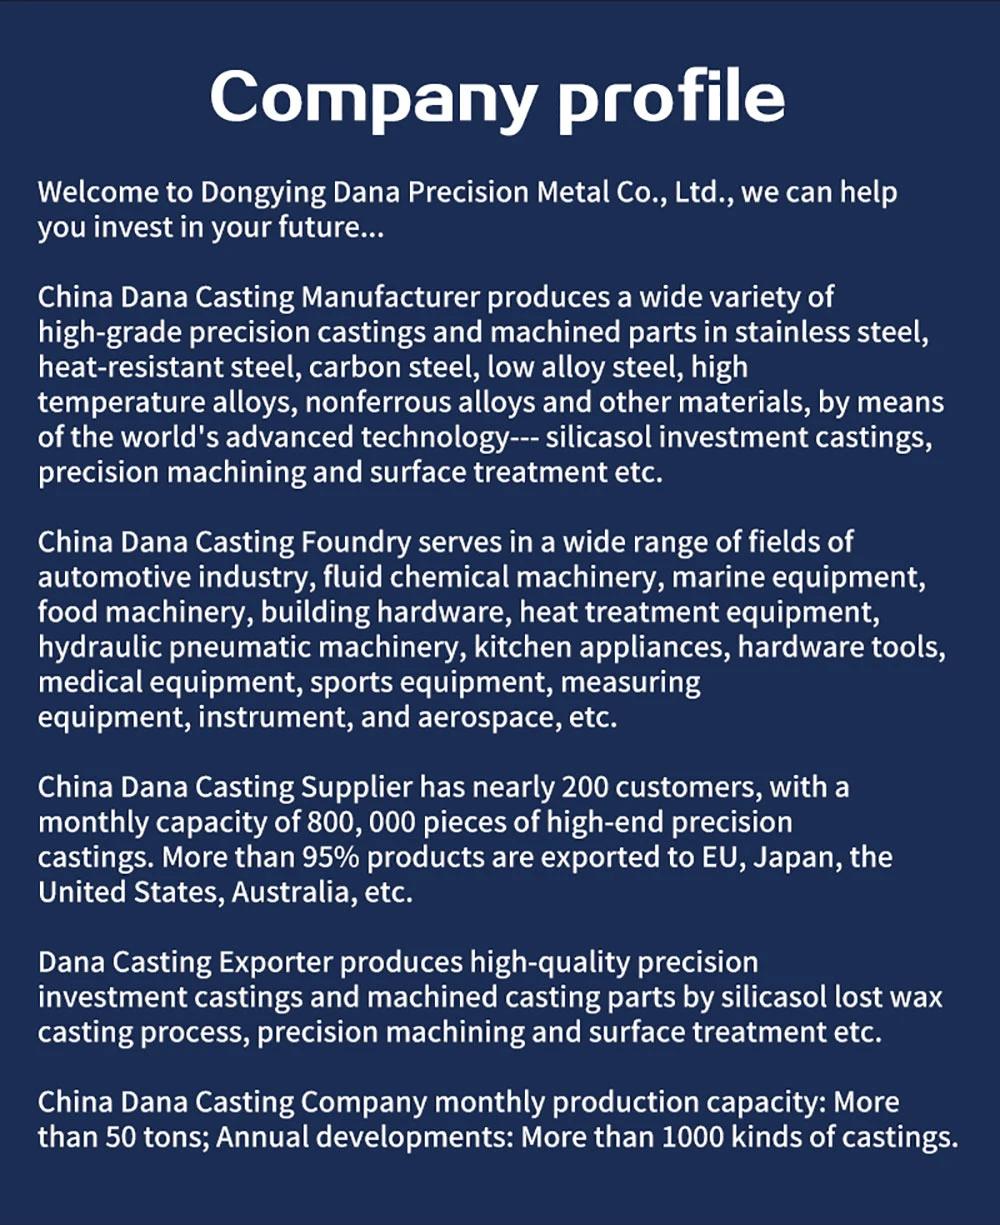 Precision Casting/ Lost Wax Casting/ Stainless Steel Casting/ Die Casting/Investment Casting for Auto Parts